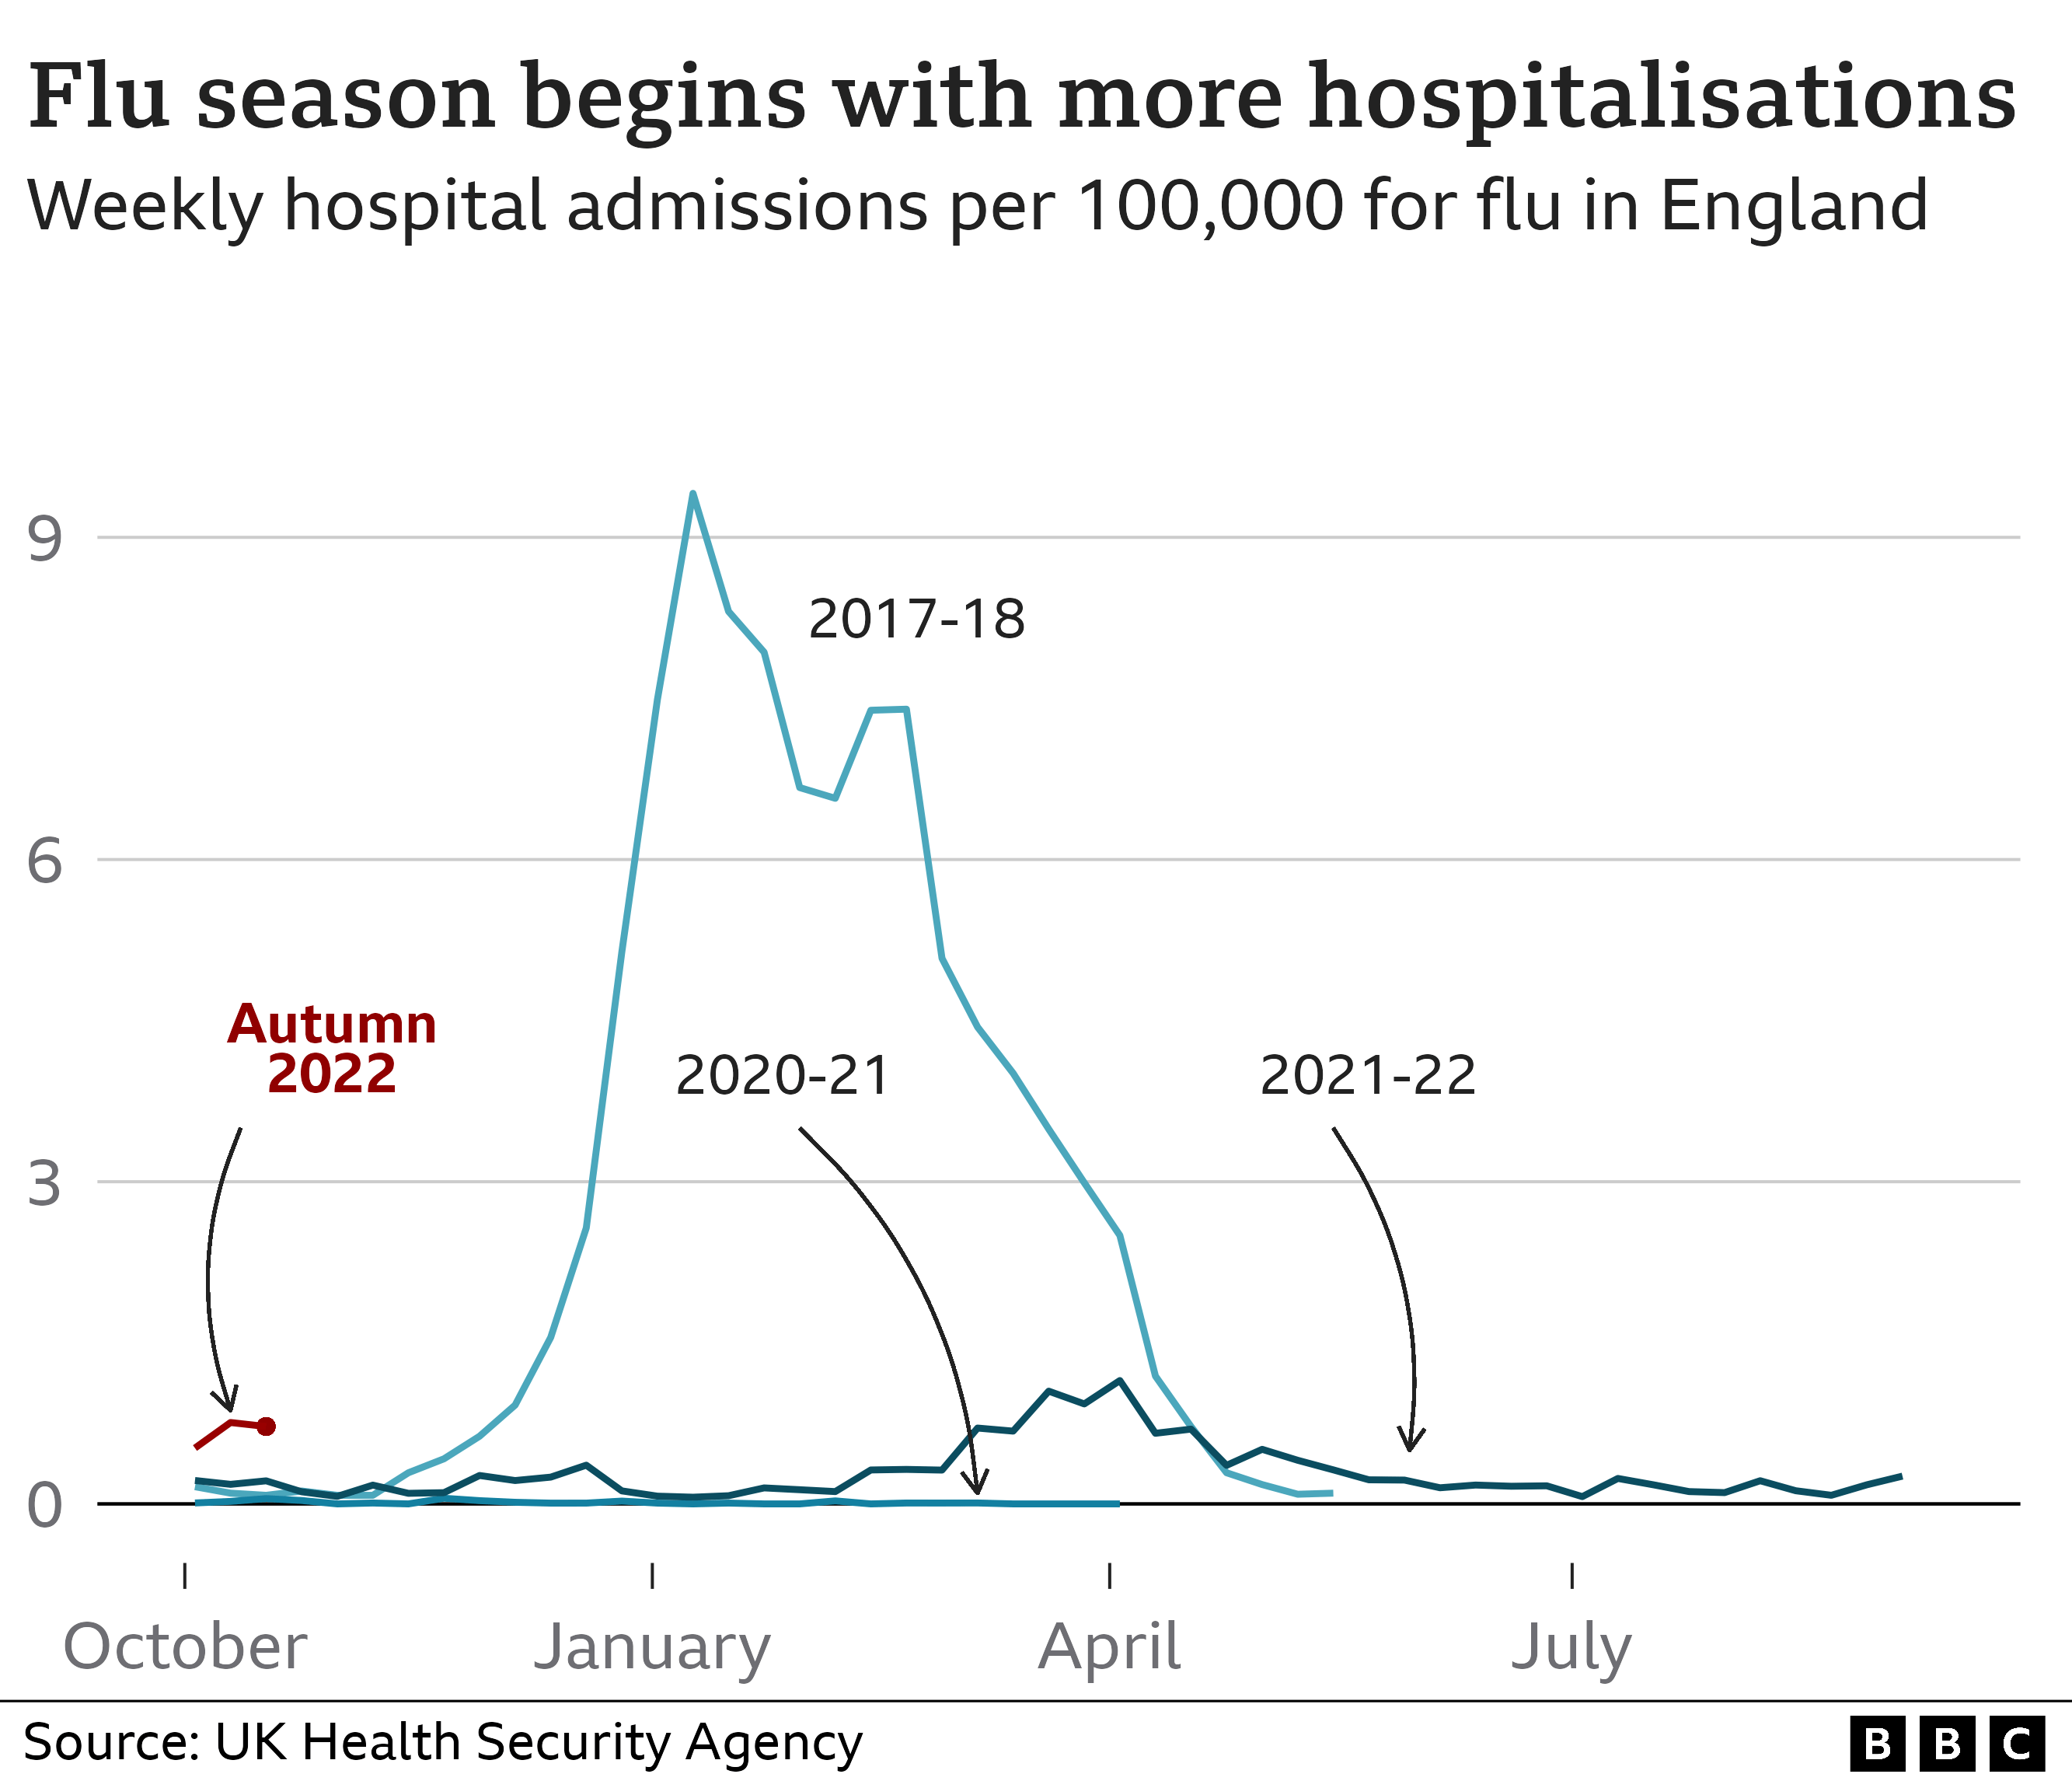 Flu season starts with more hospitalisations than a normal year